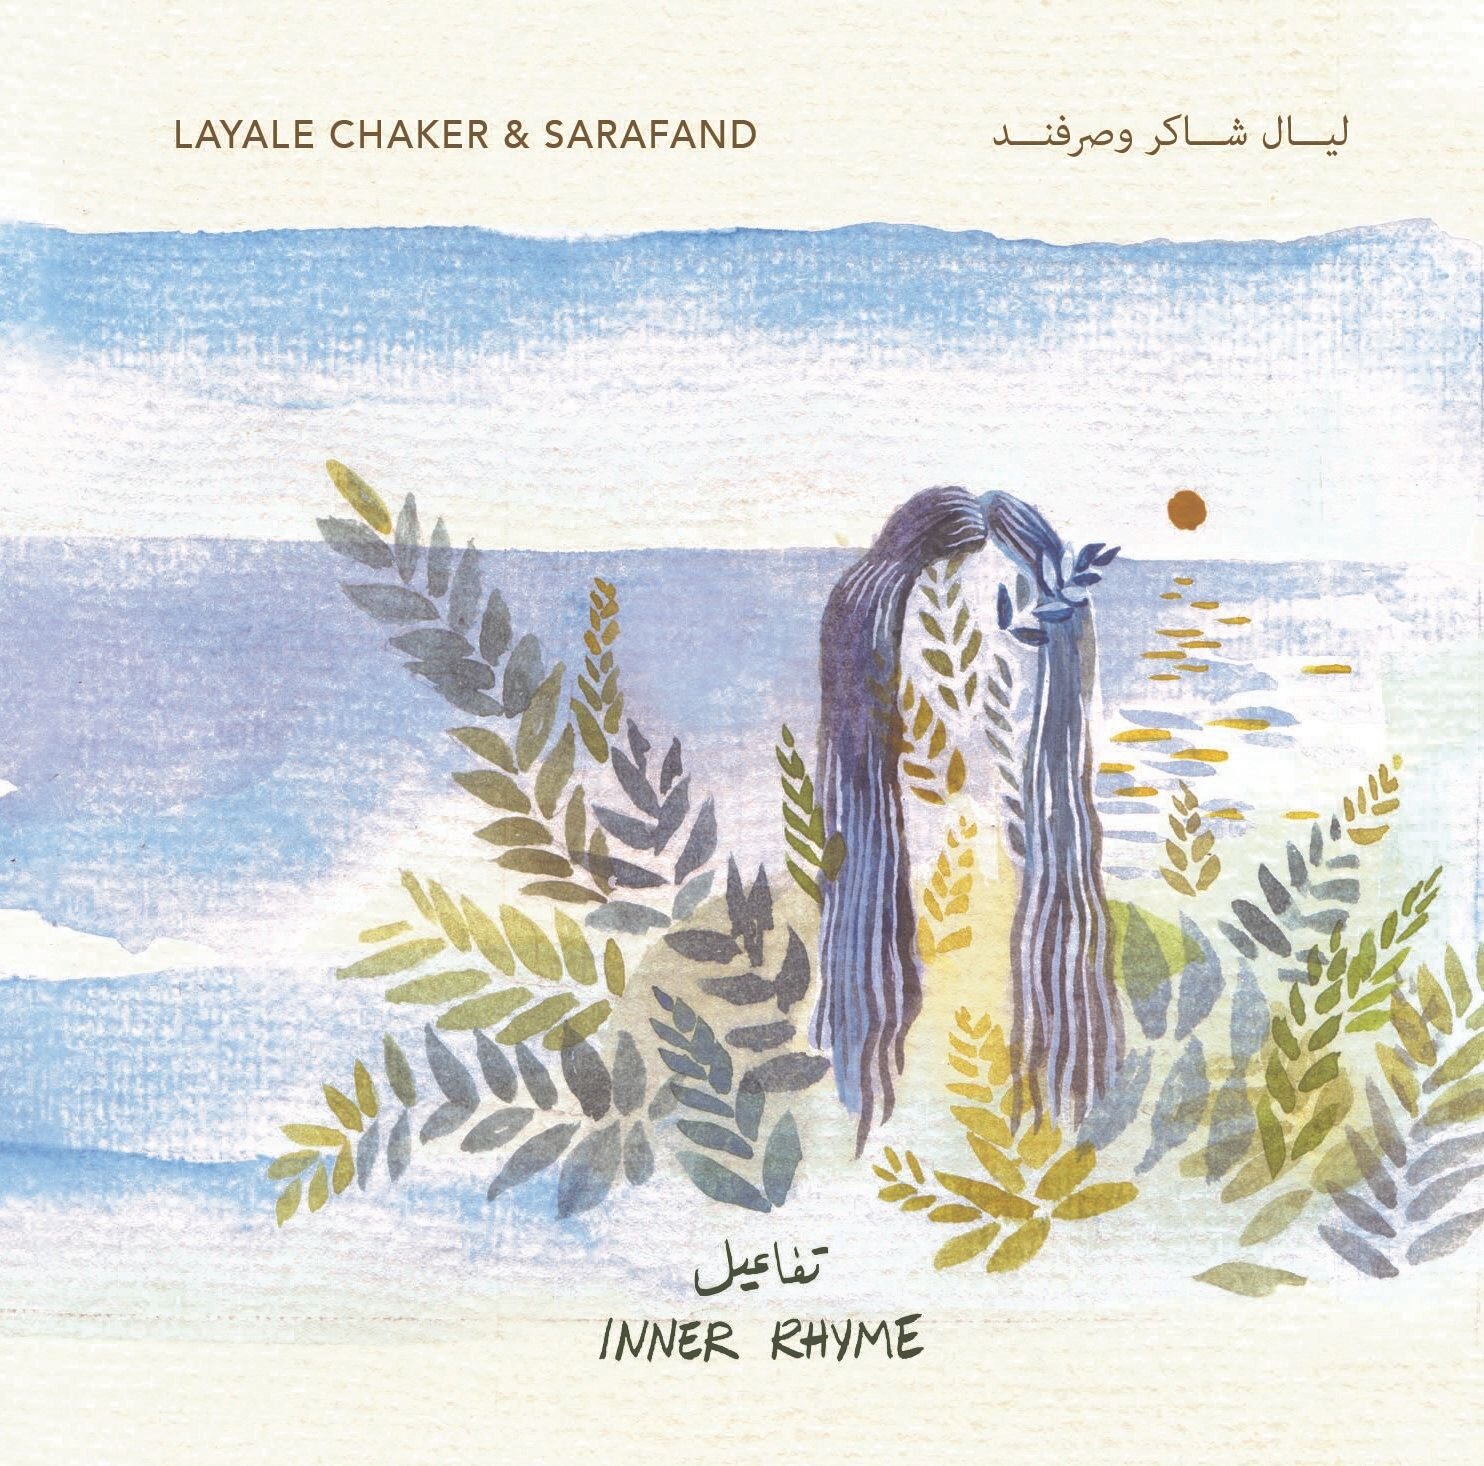 Layale Chaker and the Sarafand - "Inner Rhyme" (2019) ICR011